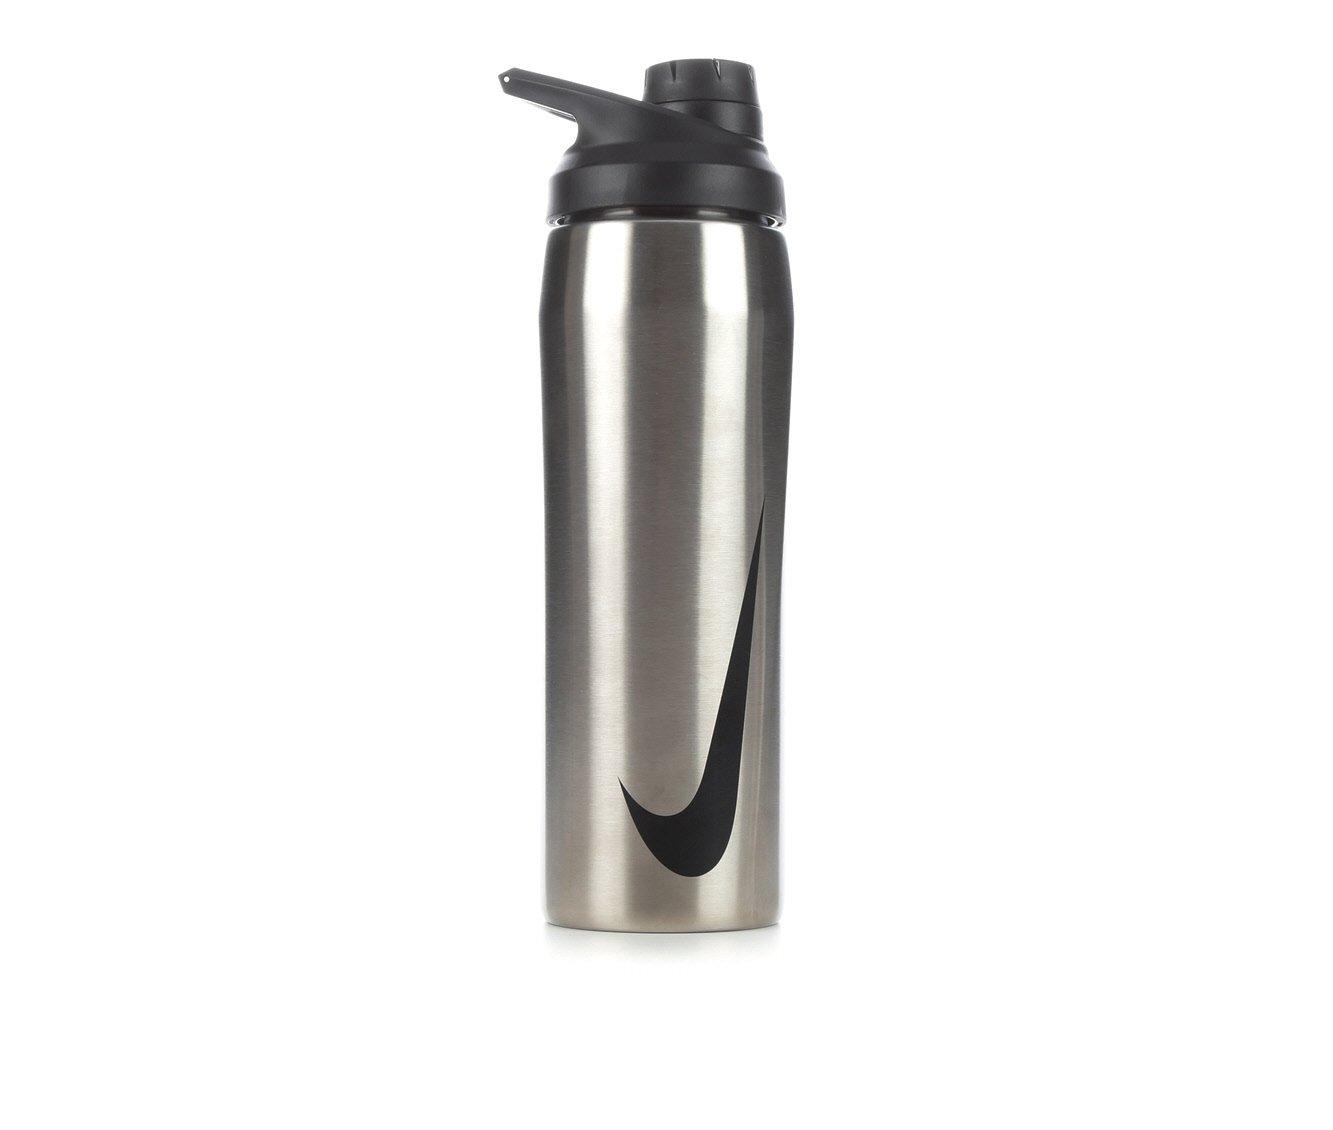 Nike Recharge Stainless Steel Straw Bottle (24 oz)